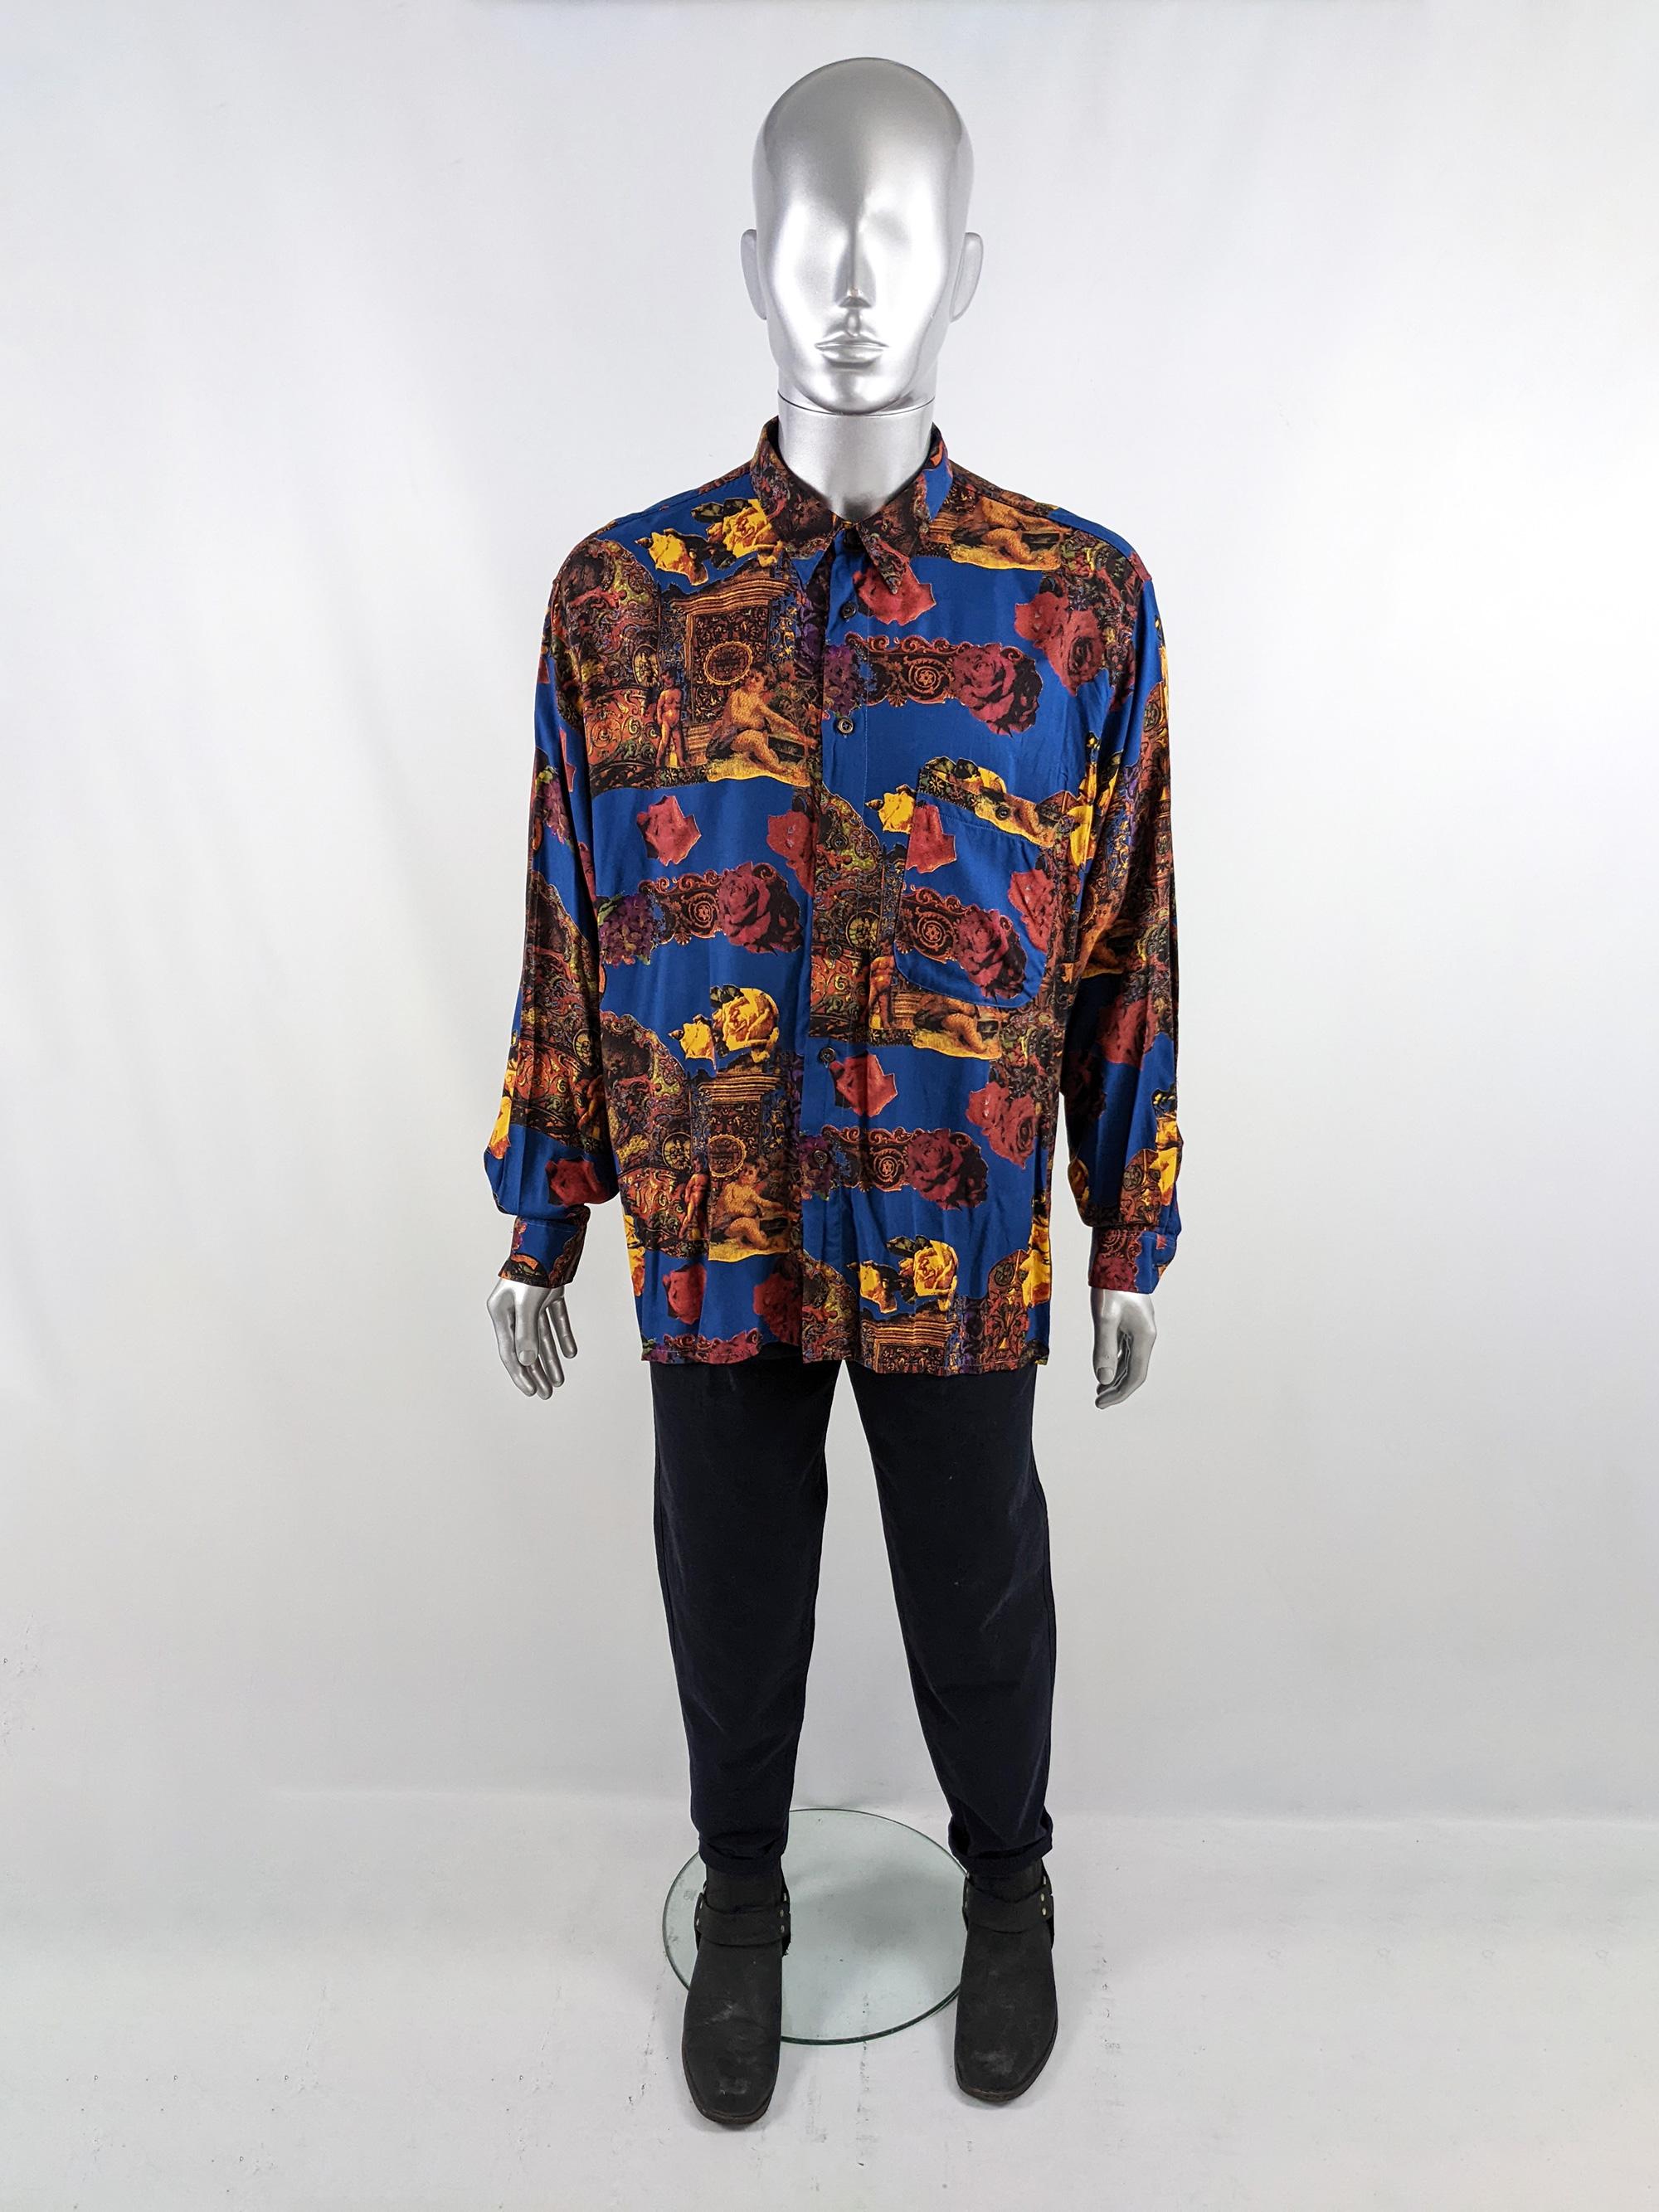 An incredible and rare vintage mens long sleeve shirt from the 80s by Zazzi. In a drapey blue viscose (rayon) with an amazing baroque print featuring cherubs and roses.

Size: Marked XL but this gives an oversized fit. Please check